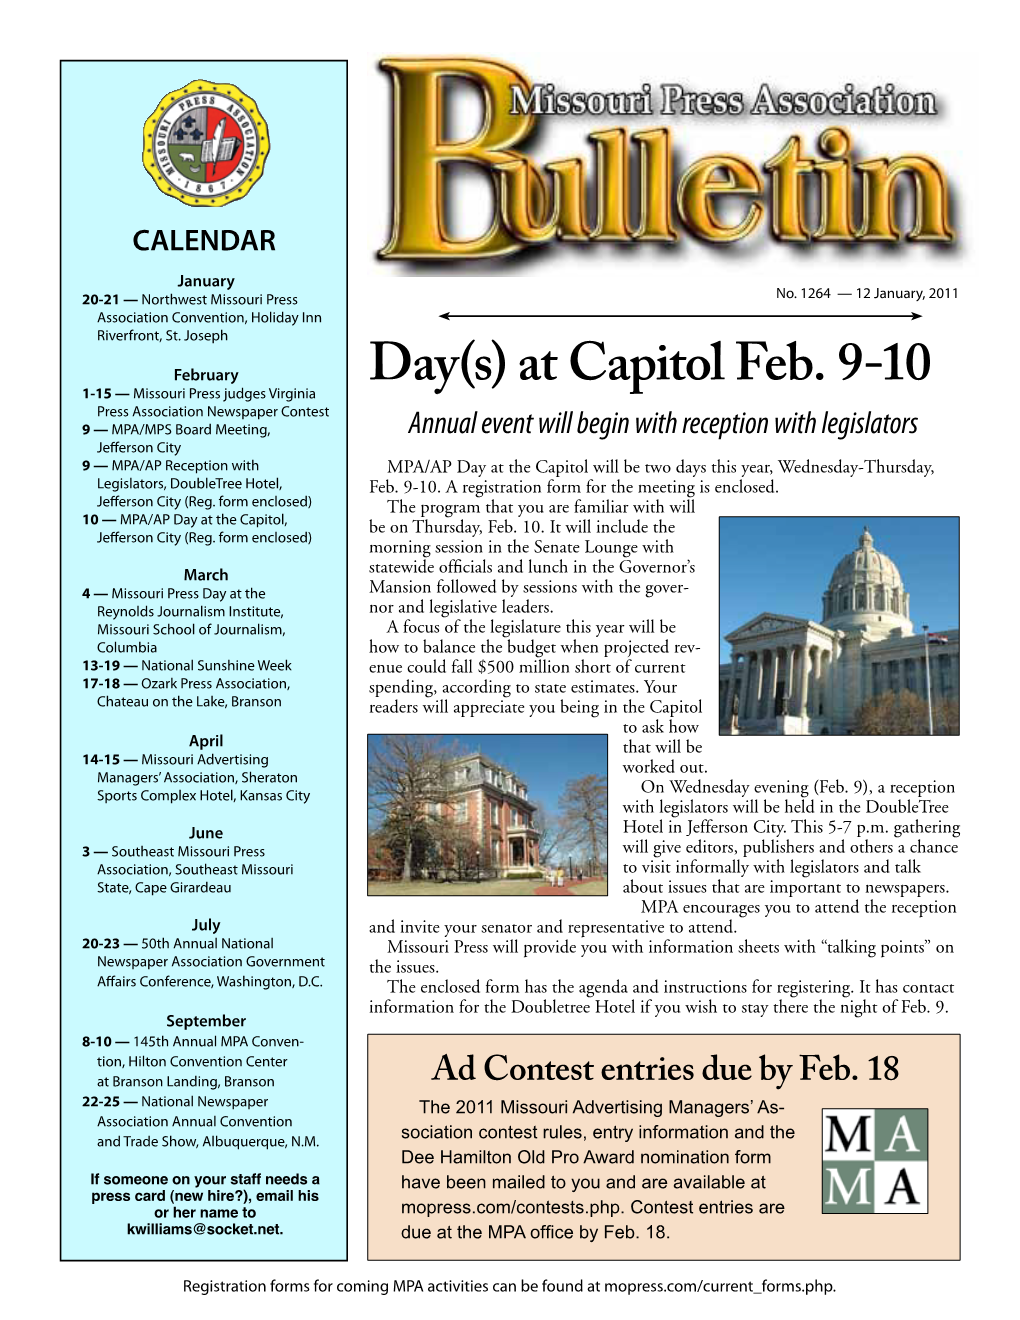 Day(S) at Capitol Feb. 9-10